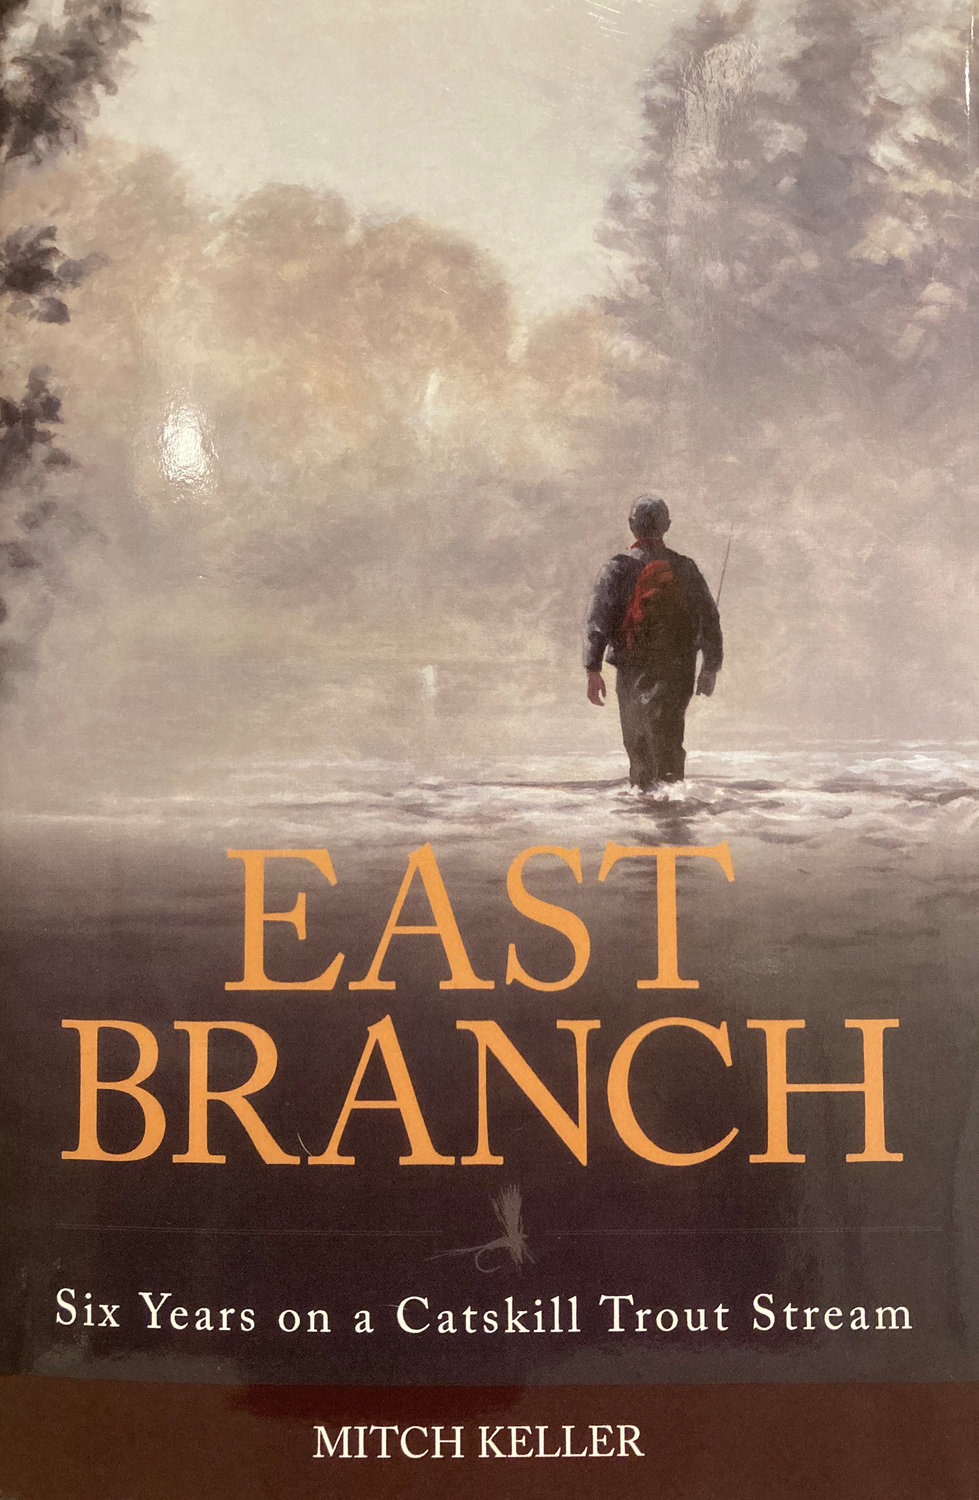 Mitch Keller’s newly published book, “East Branch, Six Years On A Catskill Trout Stream.”